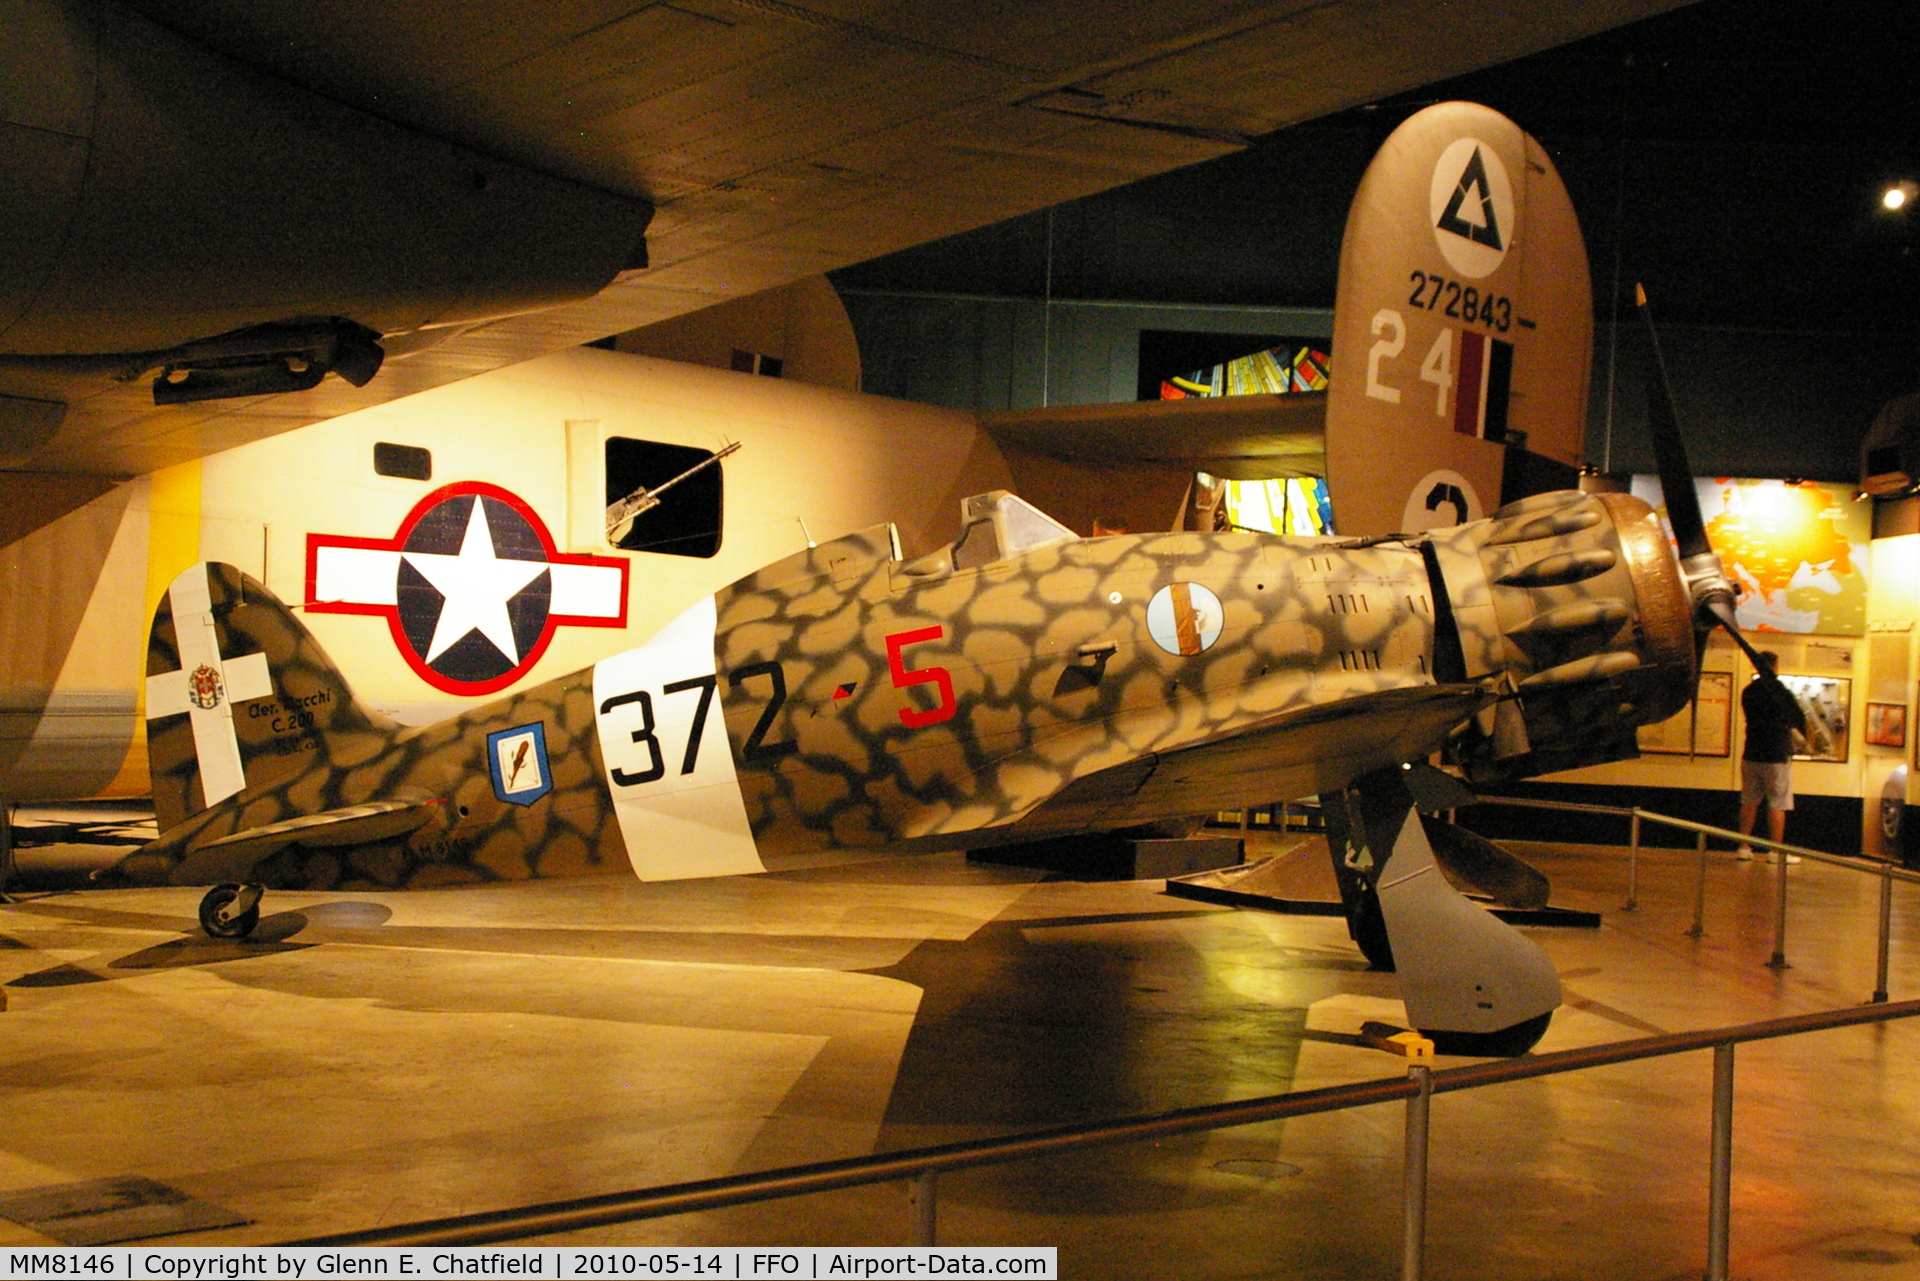 MM8146, Macchi MC.200 Saetta C/N 372, At the National Museum of the USAF.